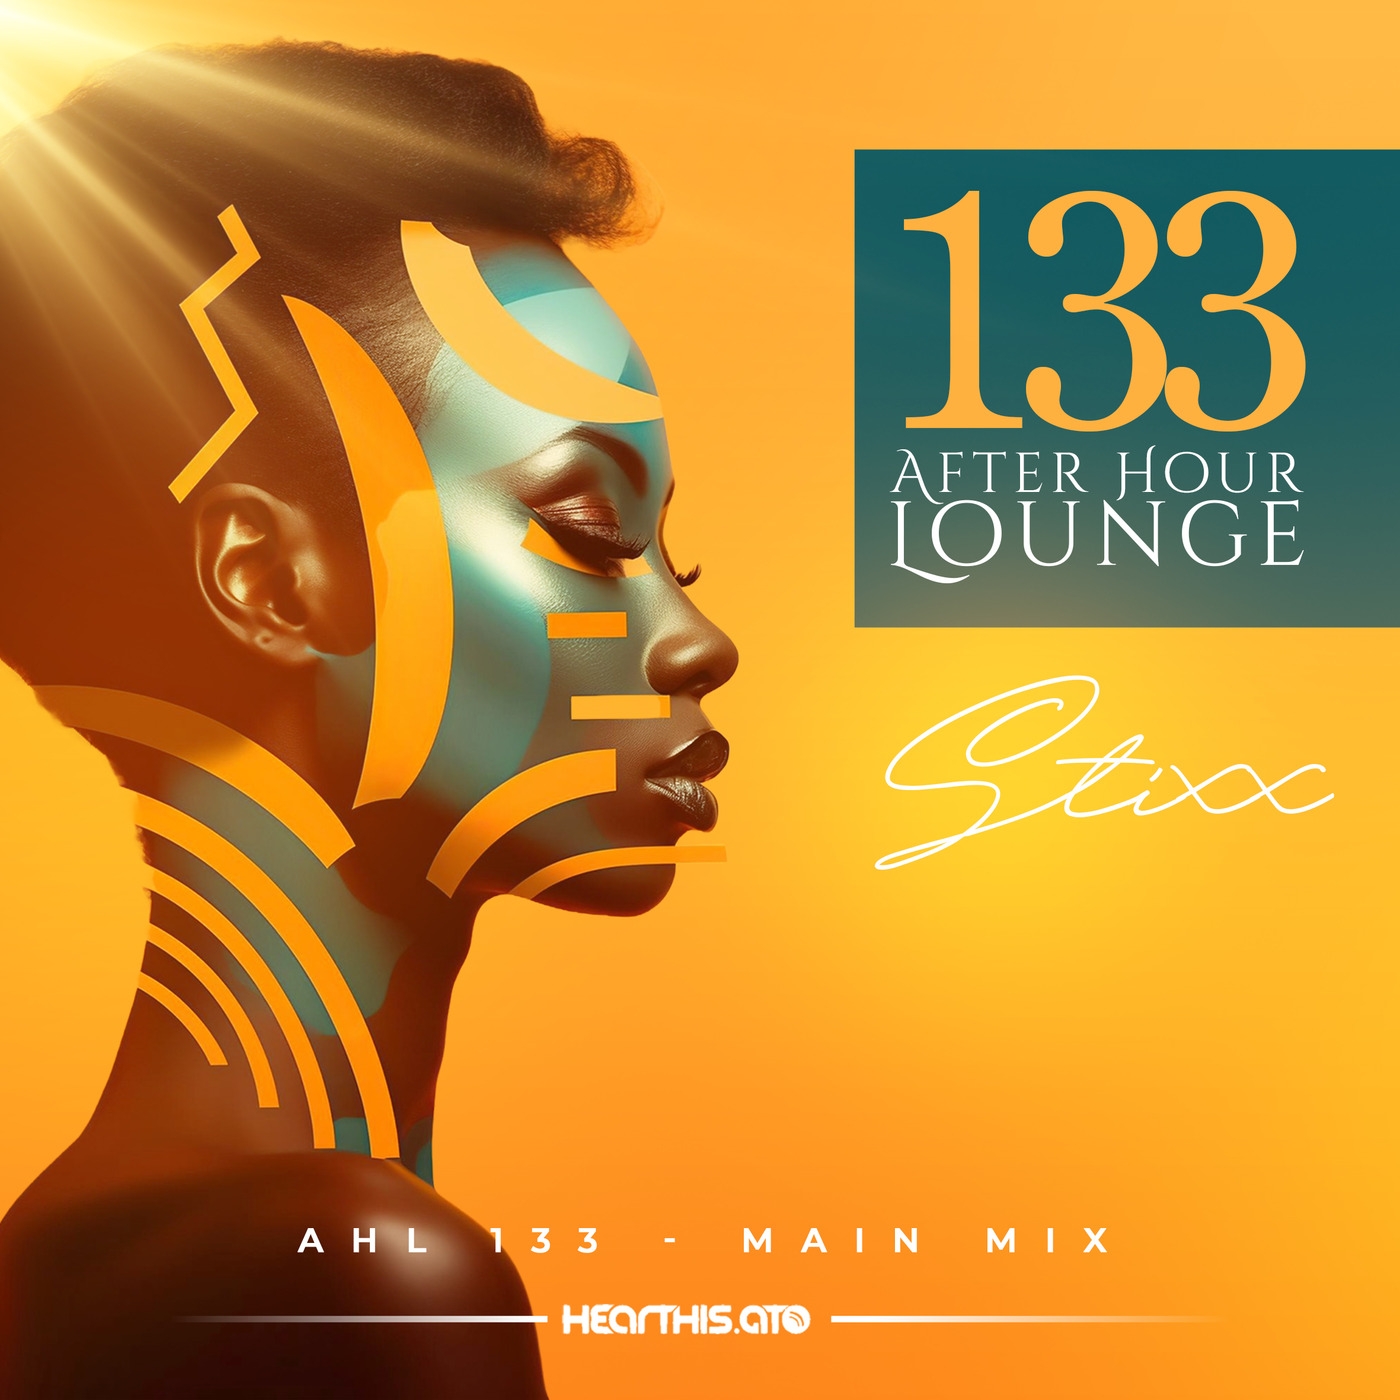 After Hour Lounge 133 (Main Mix) mixed by Stixx